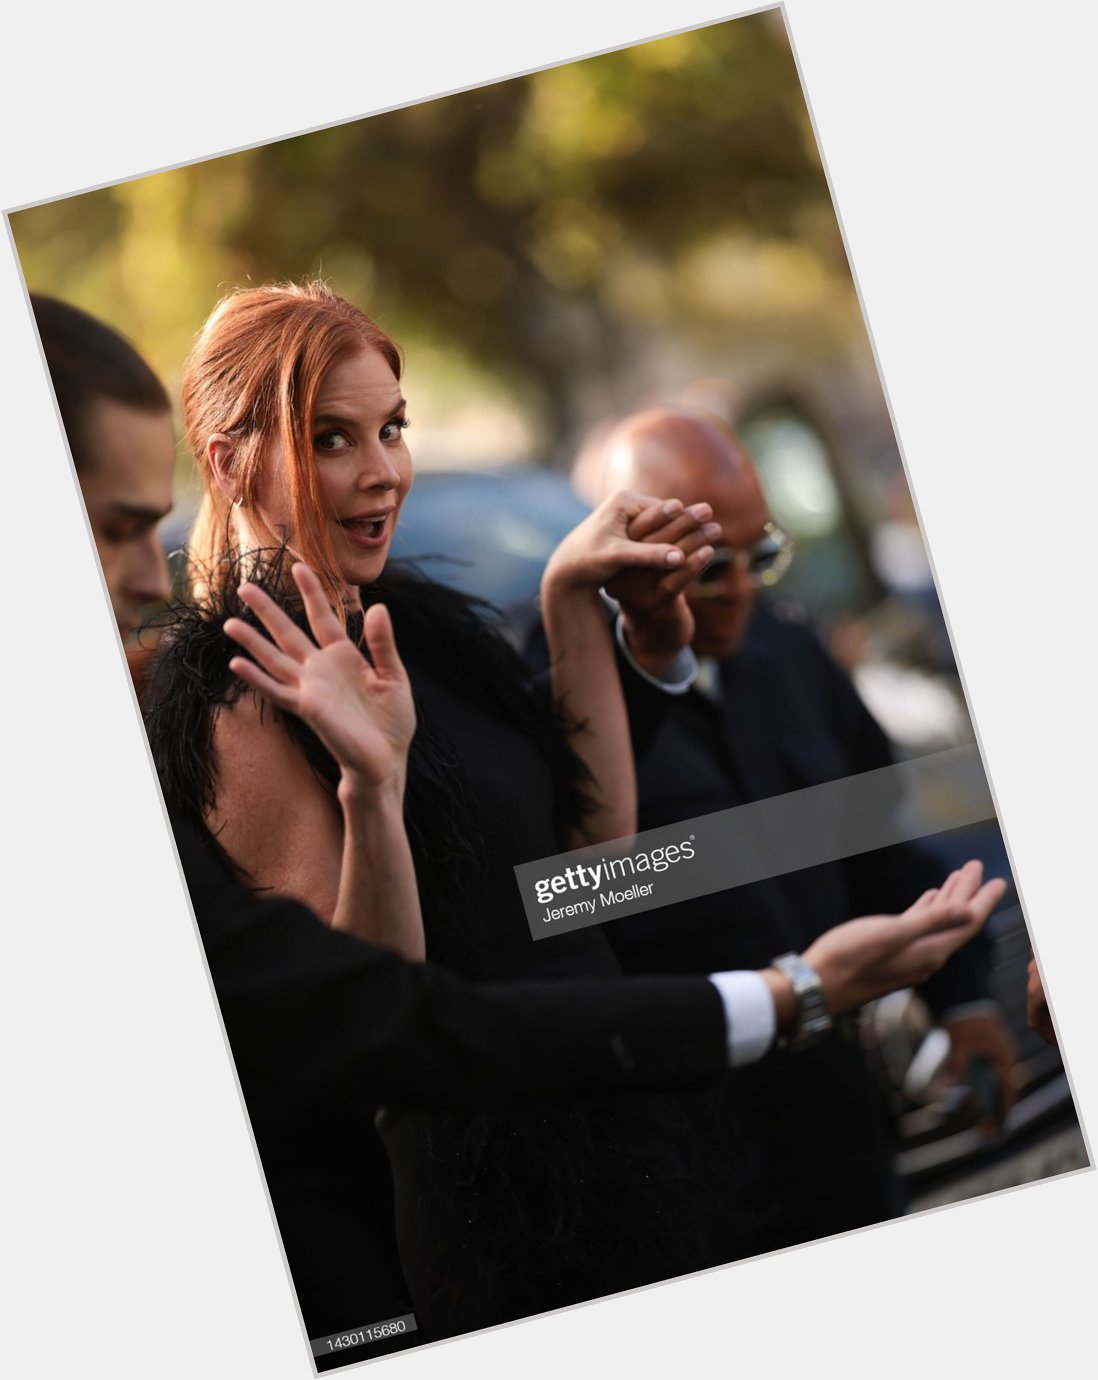 Happy sarah rafferty day to everyone celebrating!!! and happy 50th birthday to the queen herself!! 